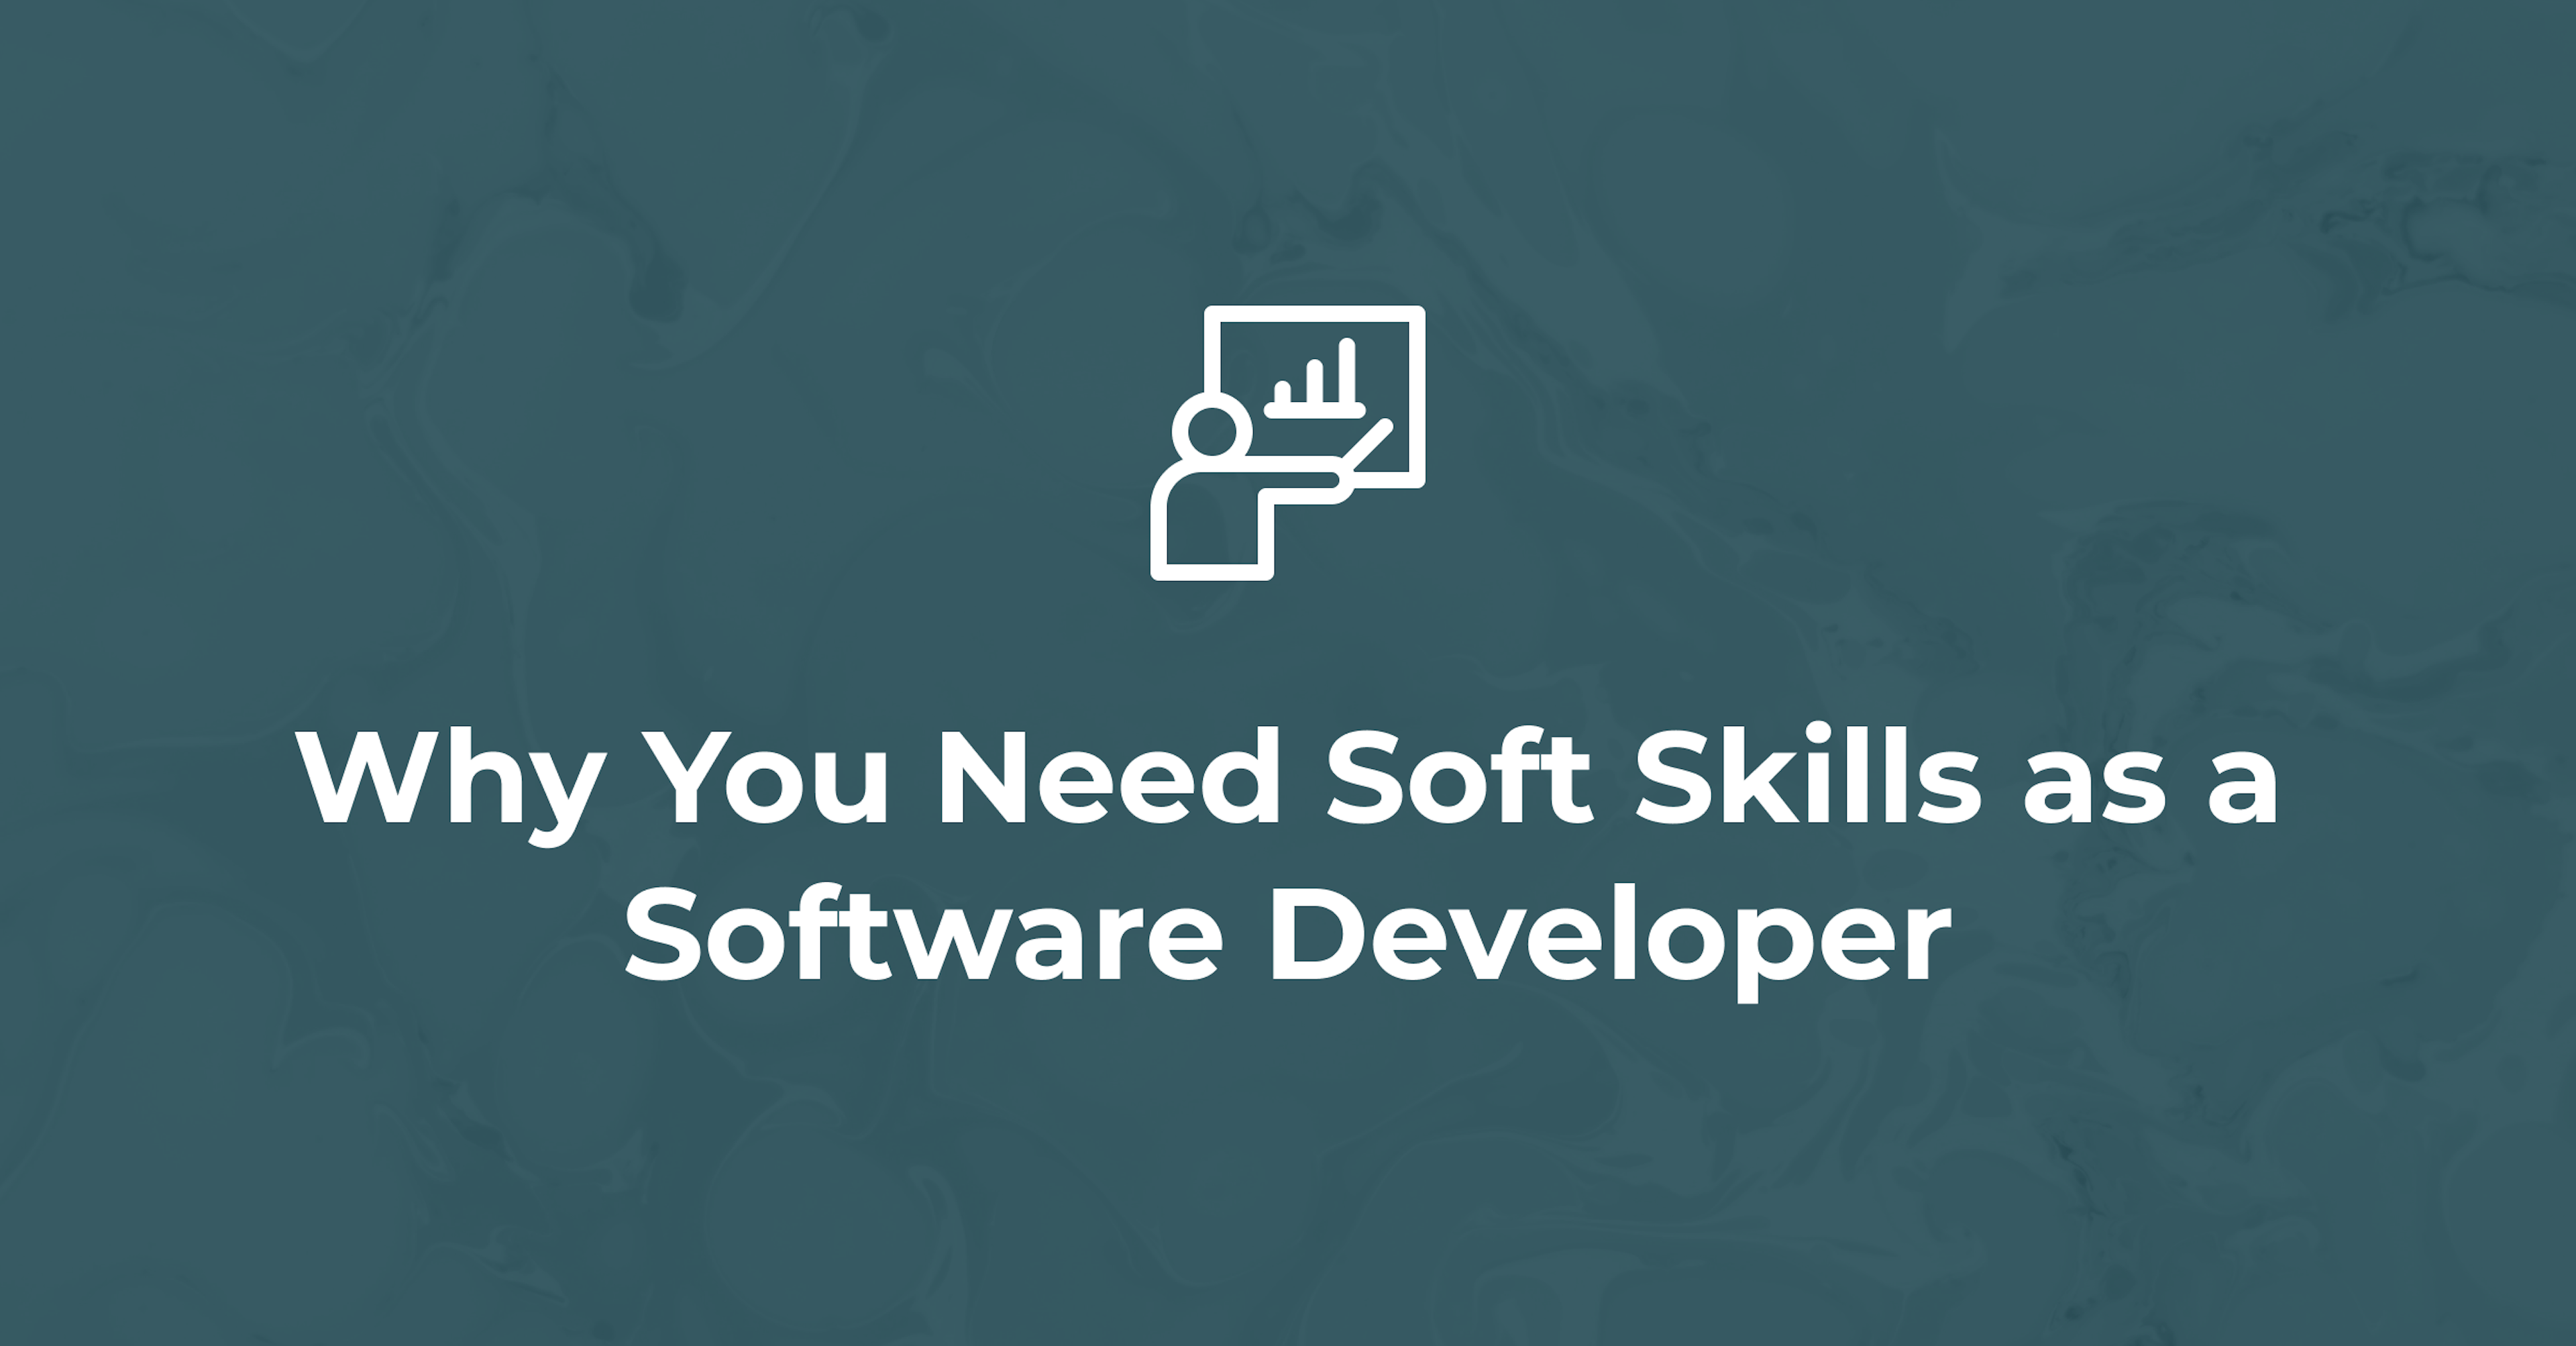 Why You Need Soft Skills as a Software Developer